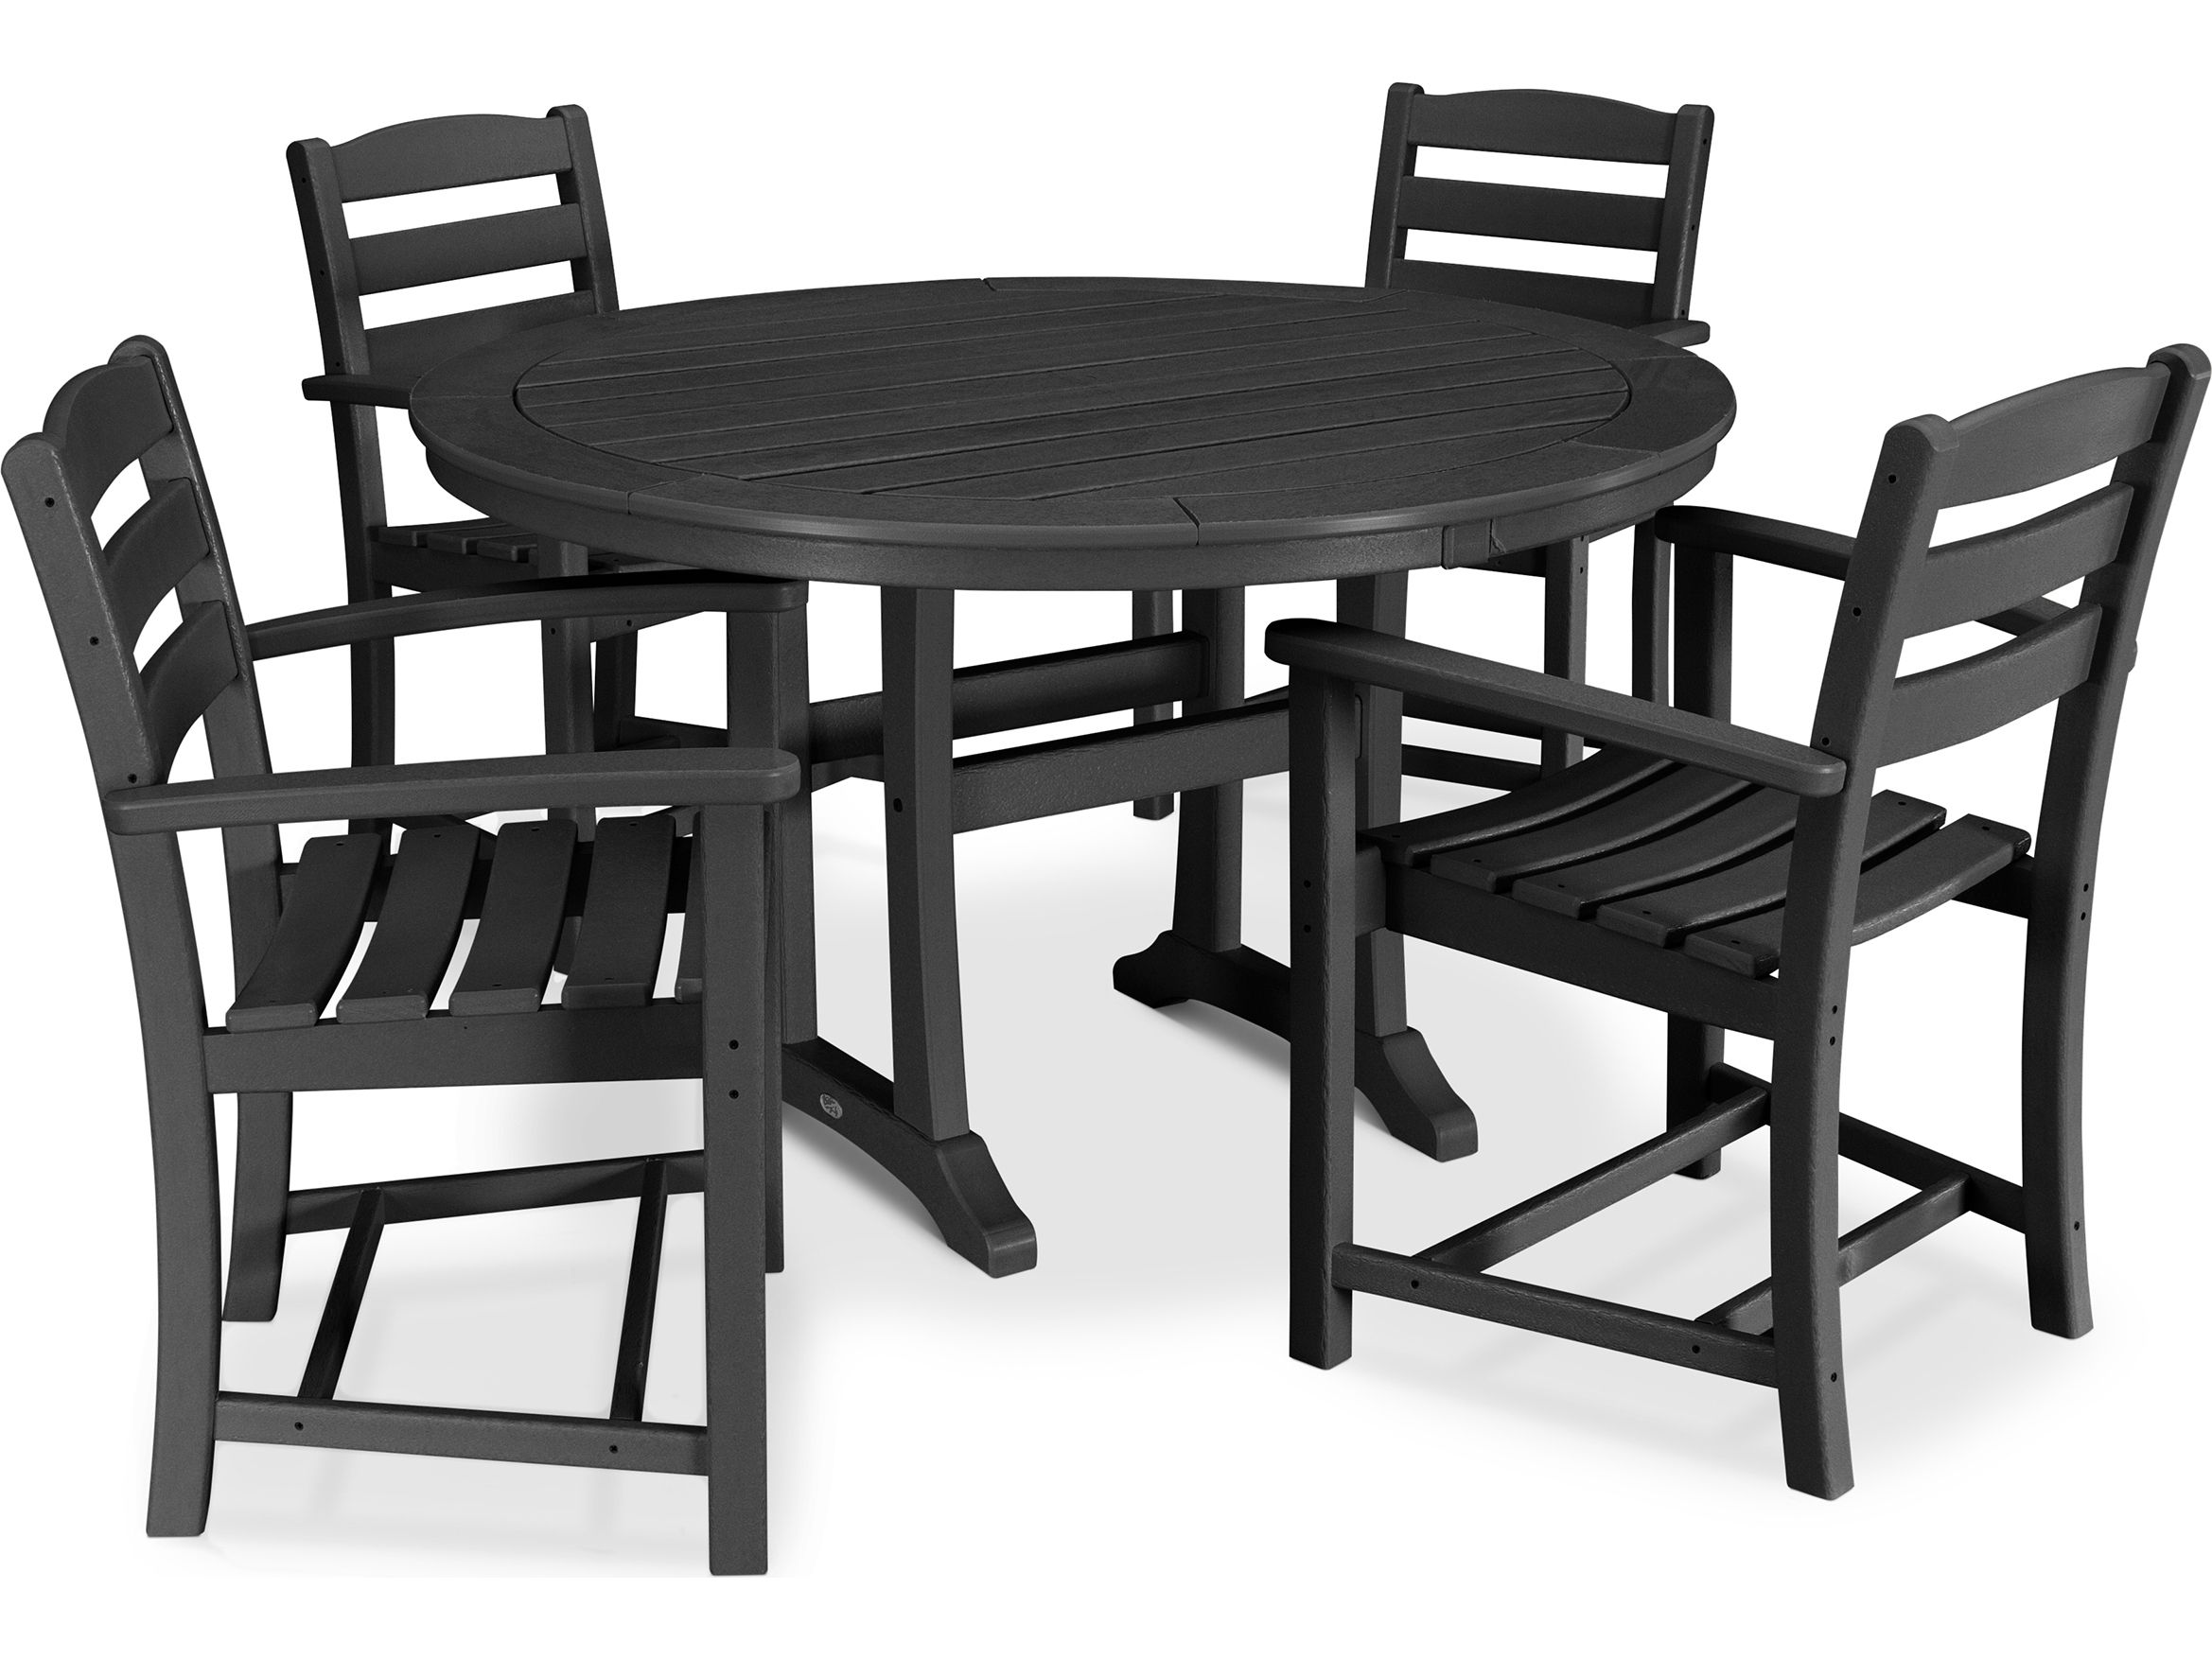 Polywood® La Casa Cafe Recycled Plastic 5 Piece Dining Set (View 8 of 15)